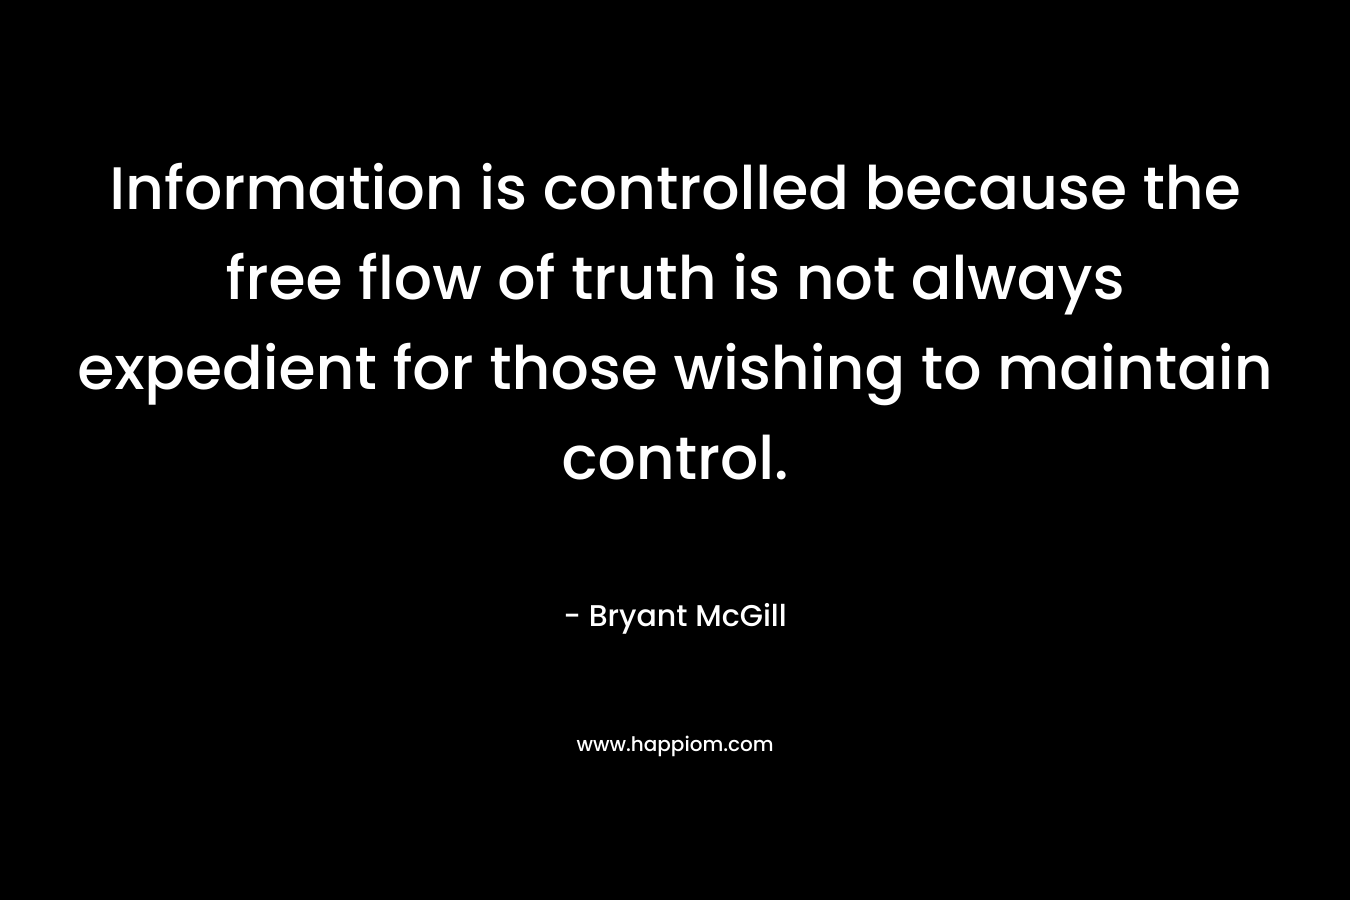 Information is controlled because the free flow of truth is not always expedient for those wishing to maintain control.